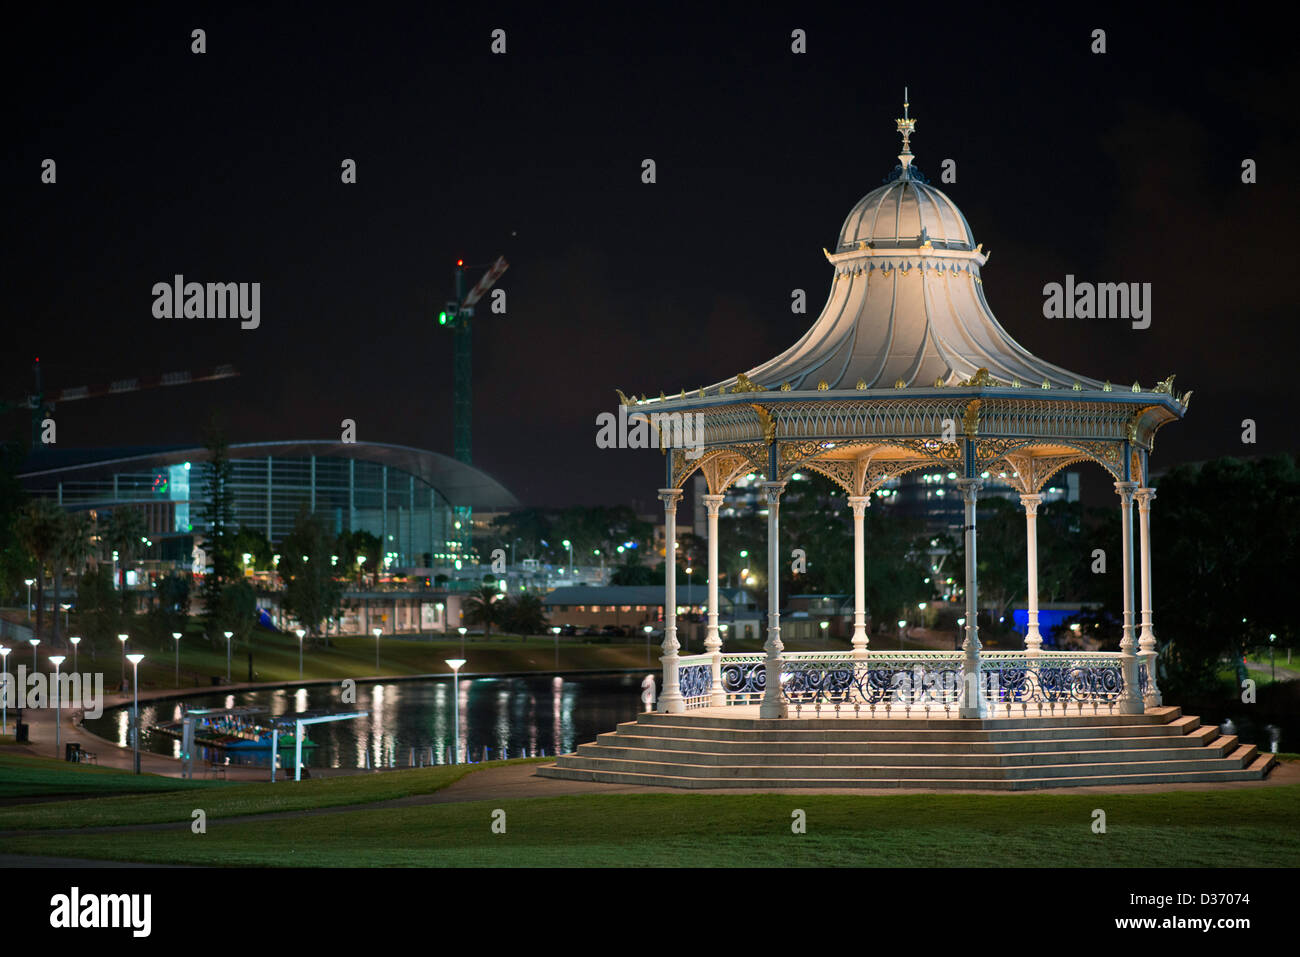 The ornate Elder Park Rotunda lit up at night flanked by the River Torrens and the Adelaide Convention Centre Stock Photo